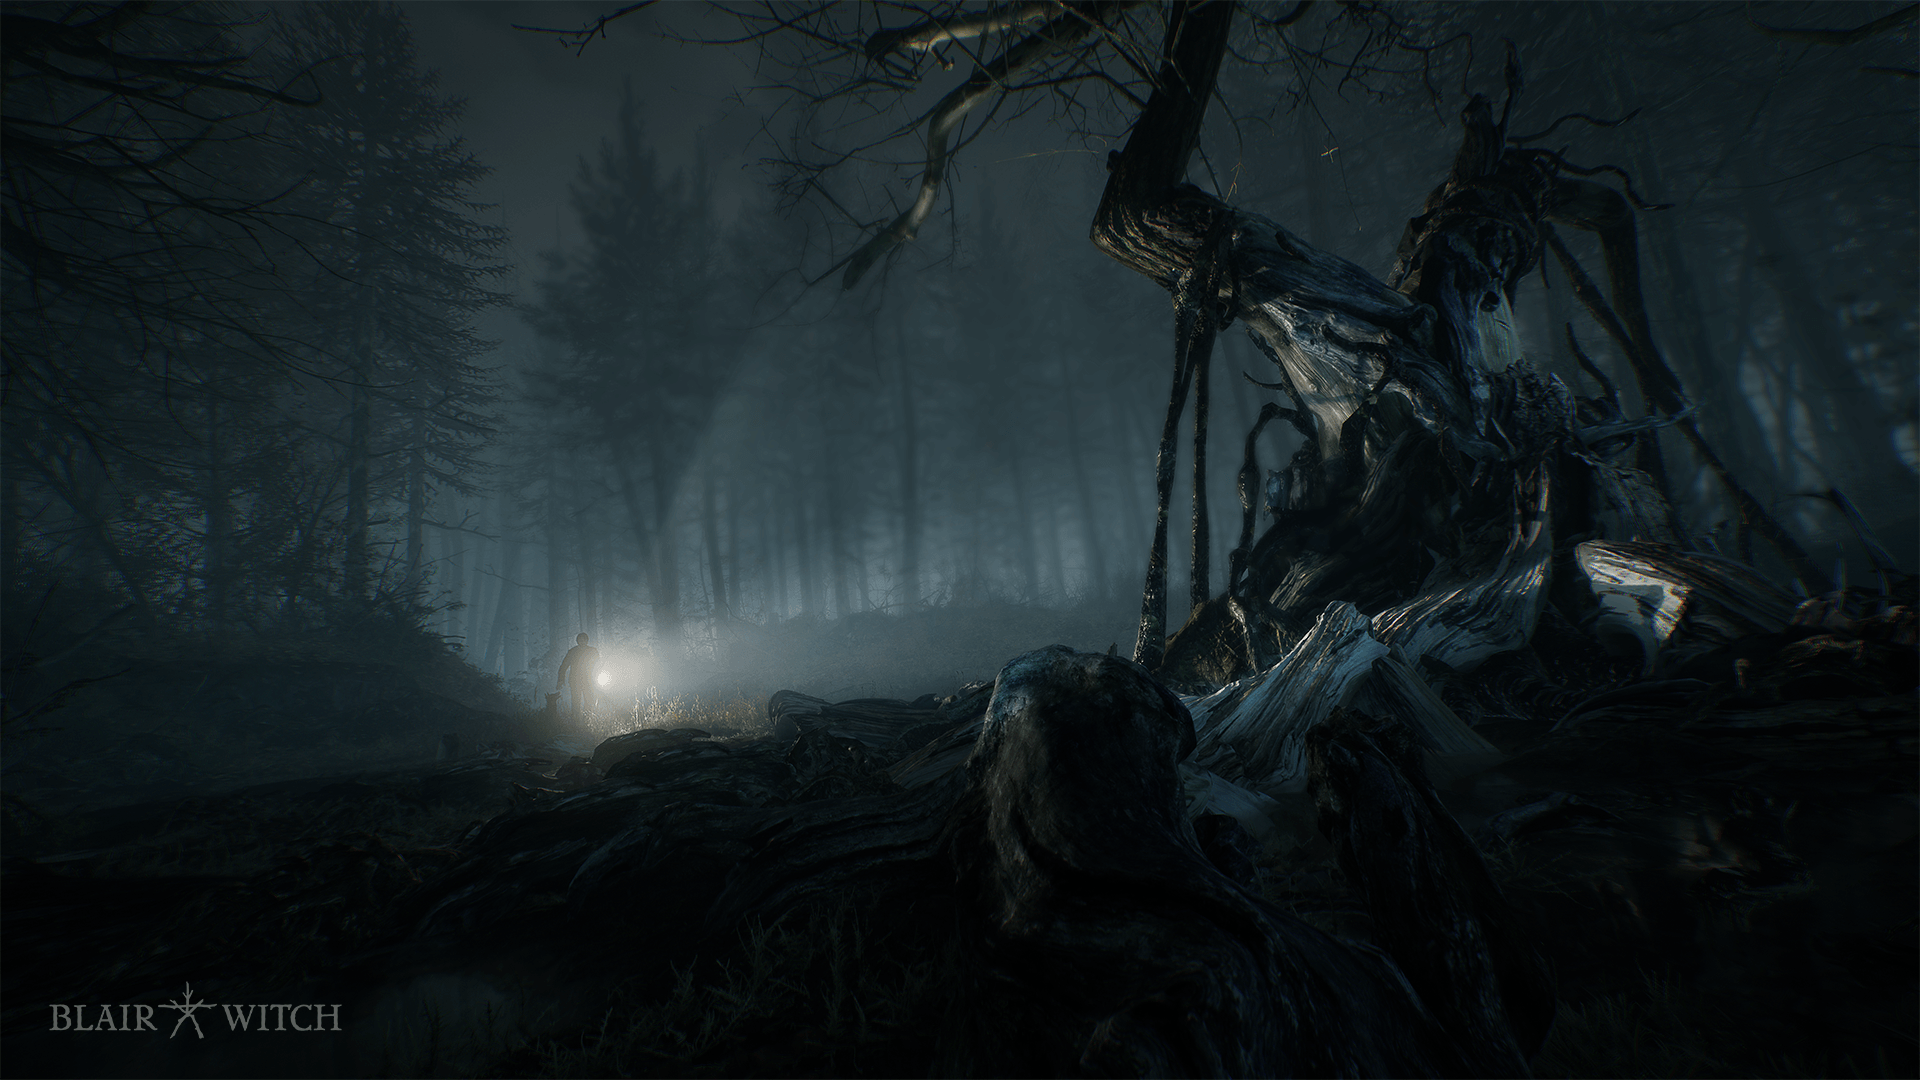 E3 2019: Blair Witch Game Announced During Xbox Press Conference